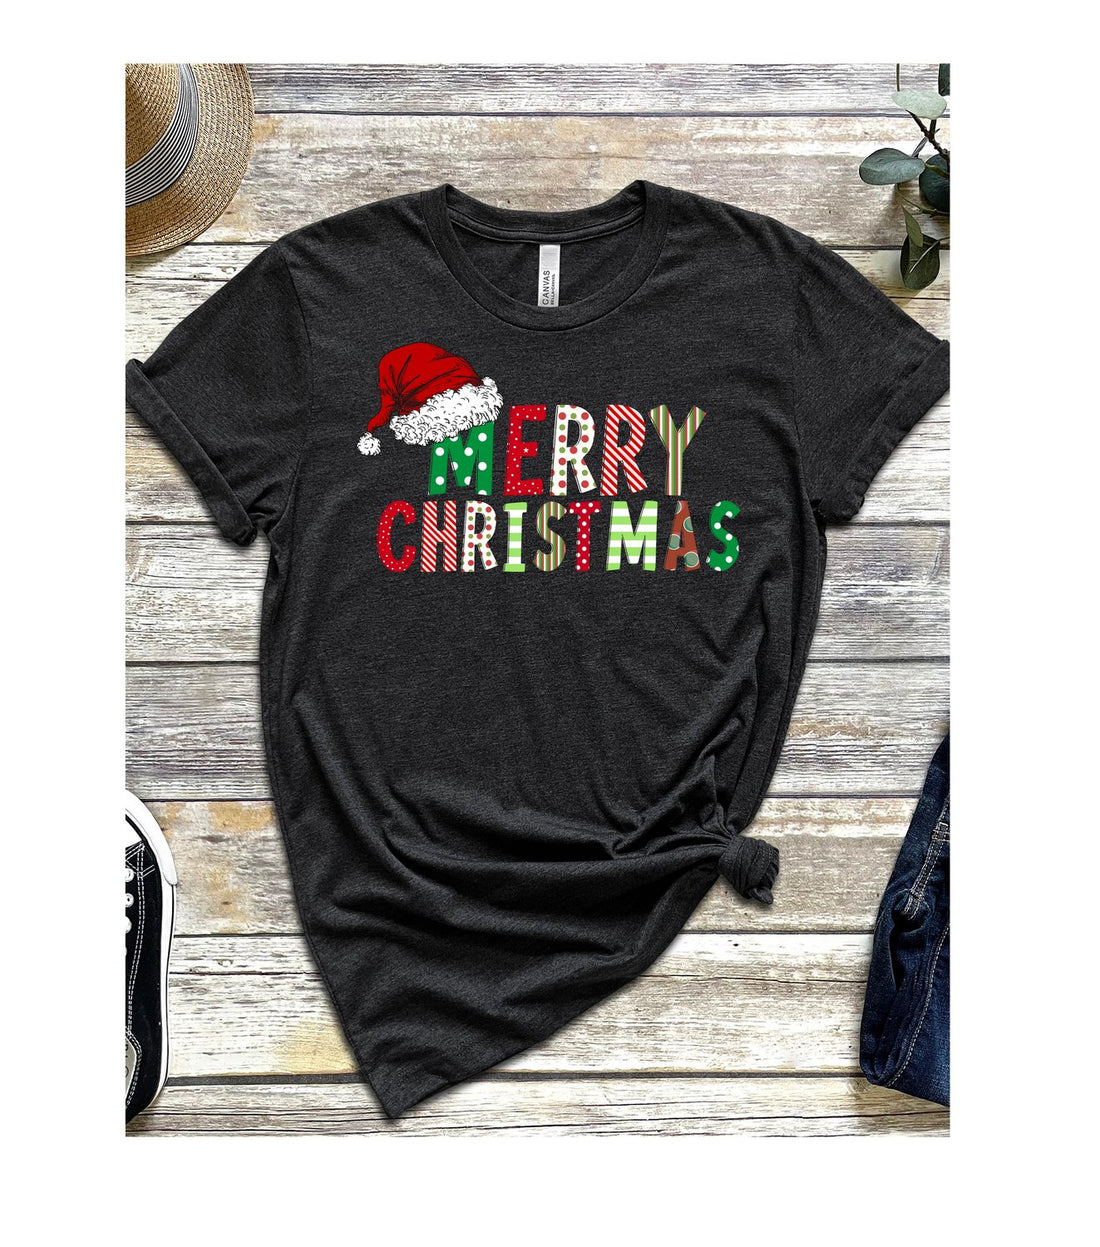 Merry Christmas Santa Hat - T-Shirts - Positively Sassy - Merry Christmas Santa Hat